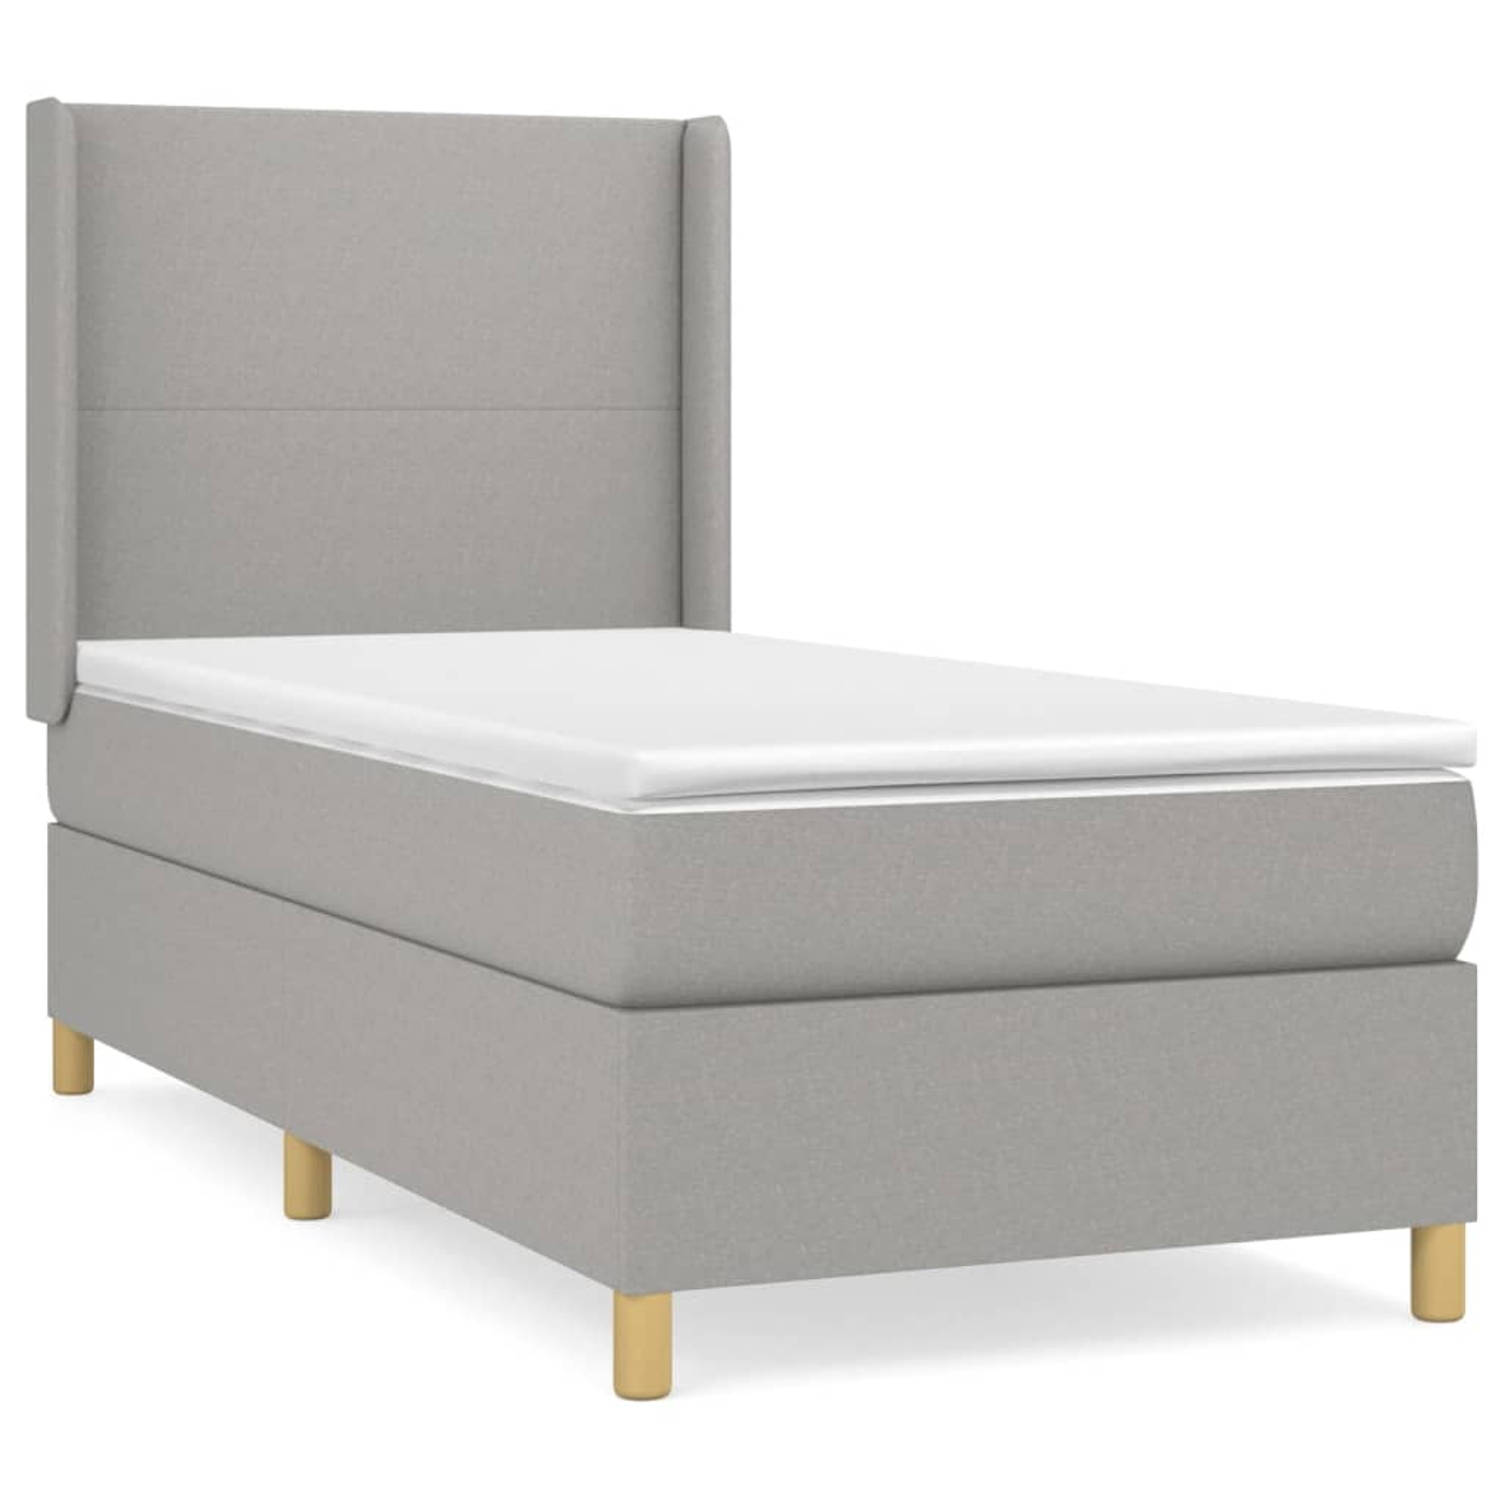 The Living Store Boxspringbed - Comfort - Bed - 80x200 - Lichtgrijs